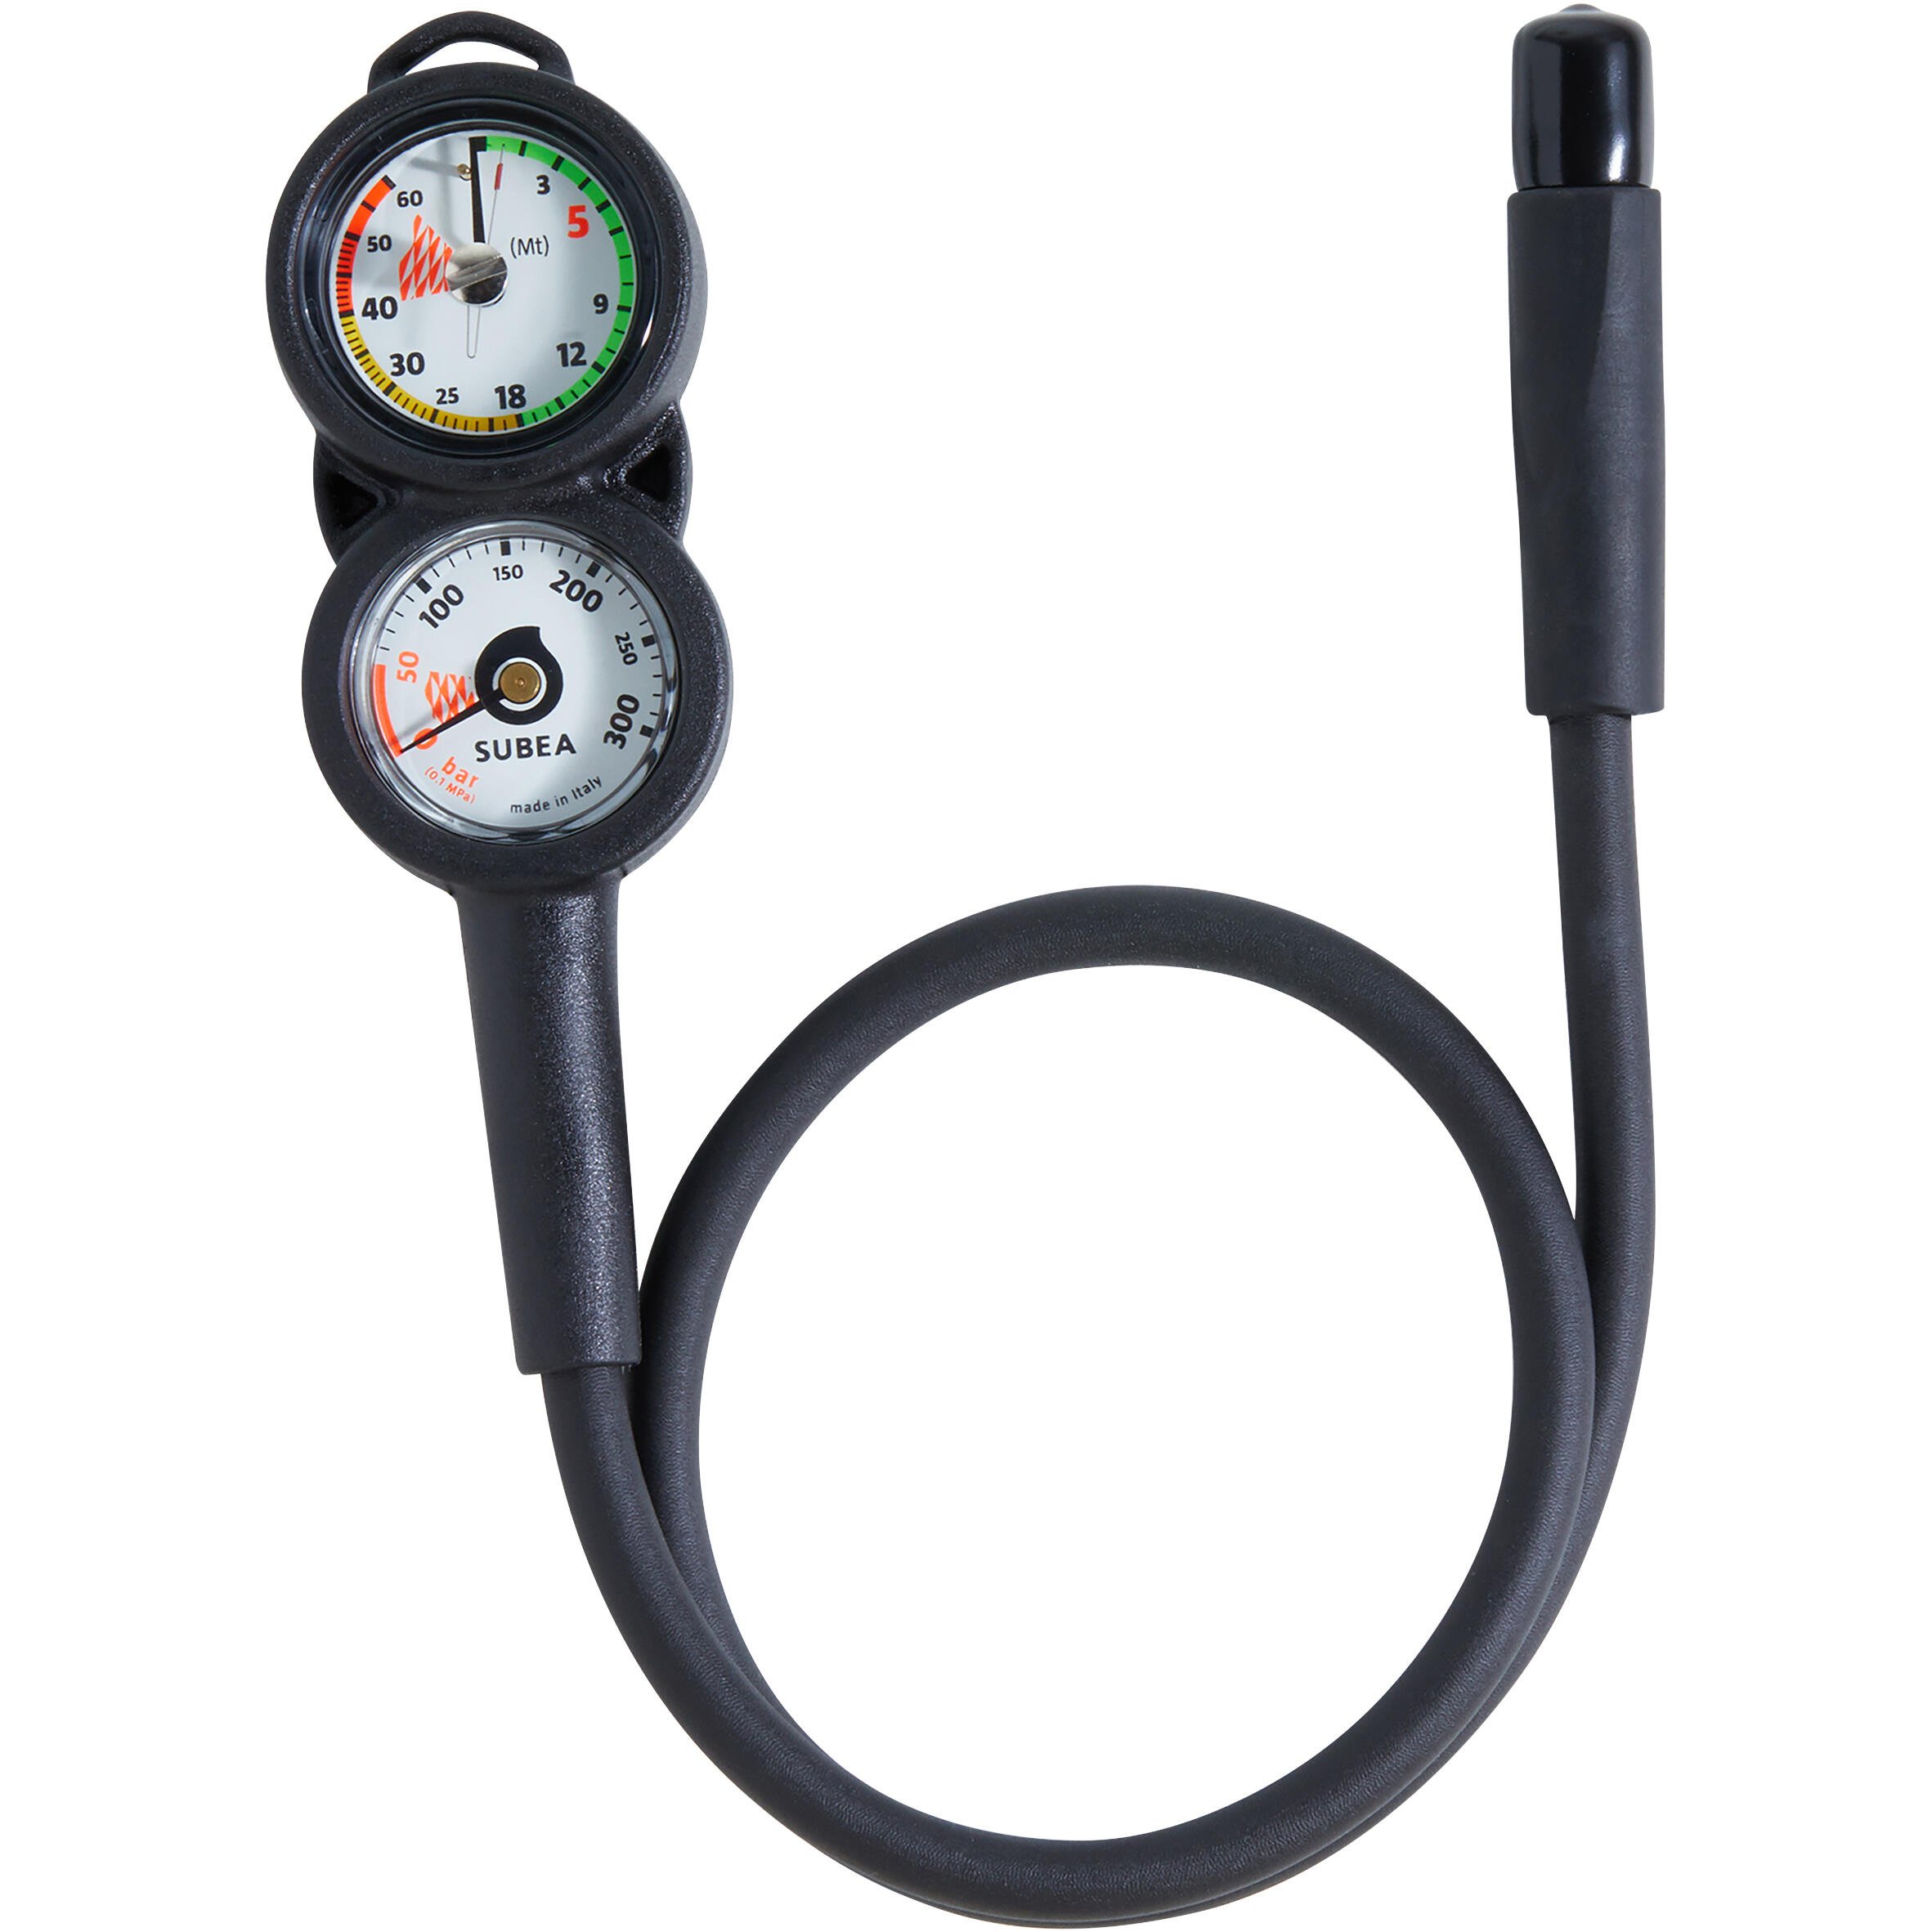 SUBEA Scuba diving console with 300 bar pressure gauge and depth gauge